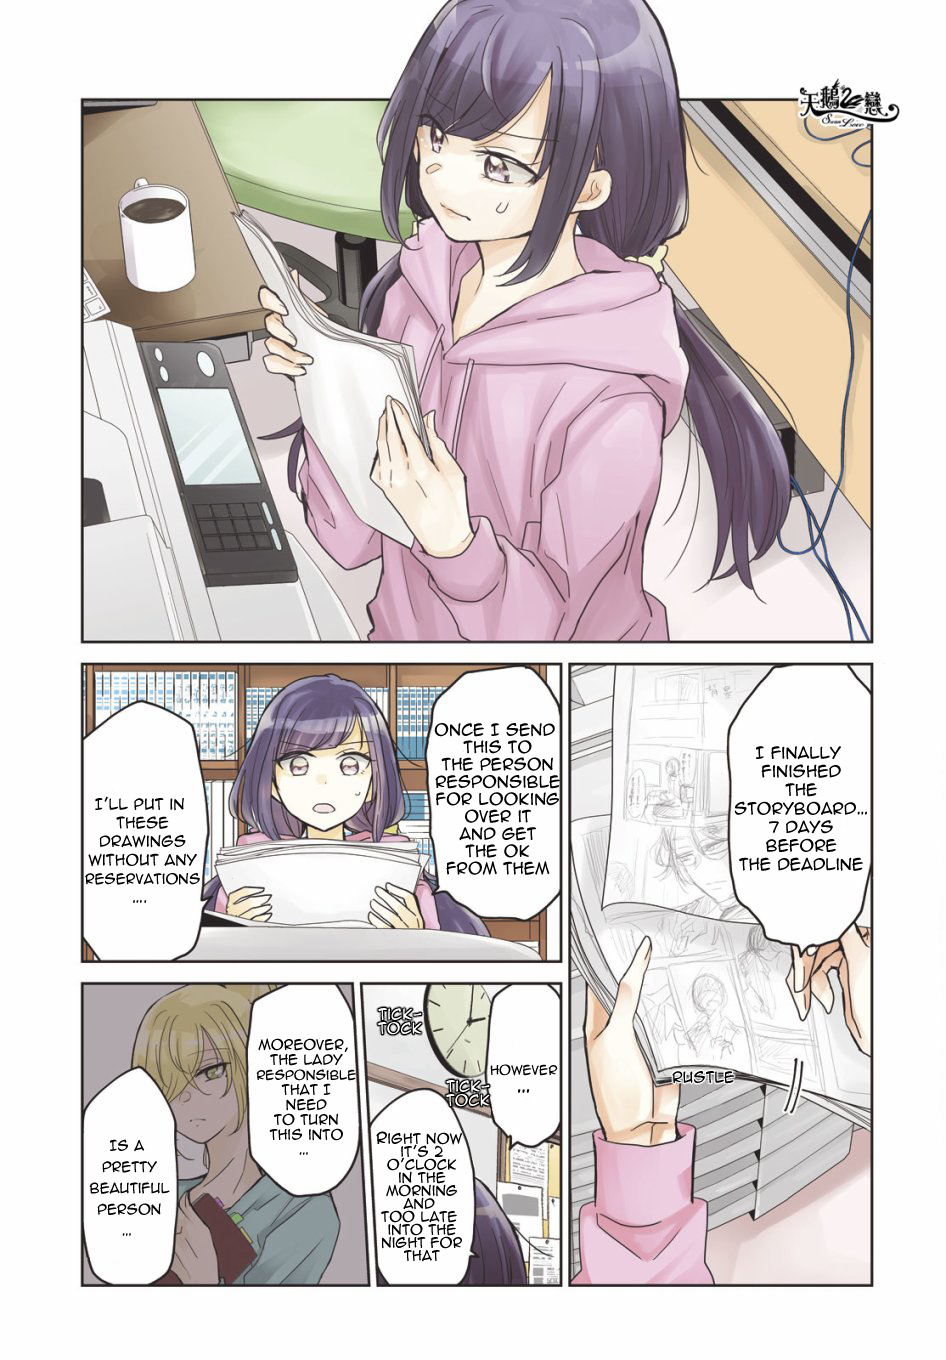 A Workplace Where You Can't Help But Smile - Page 2